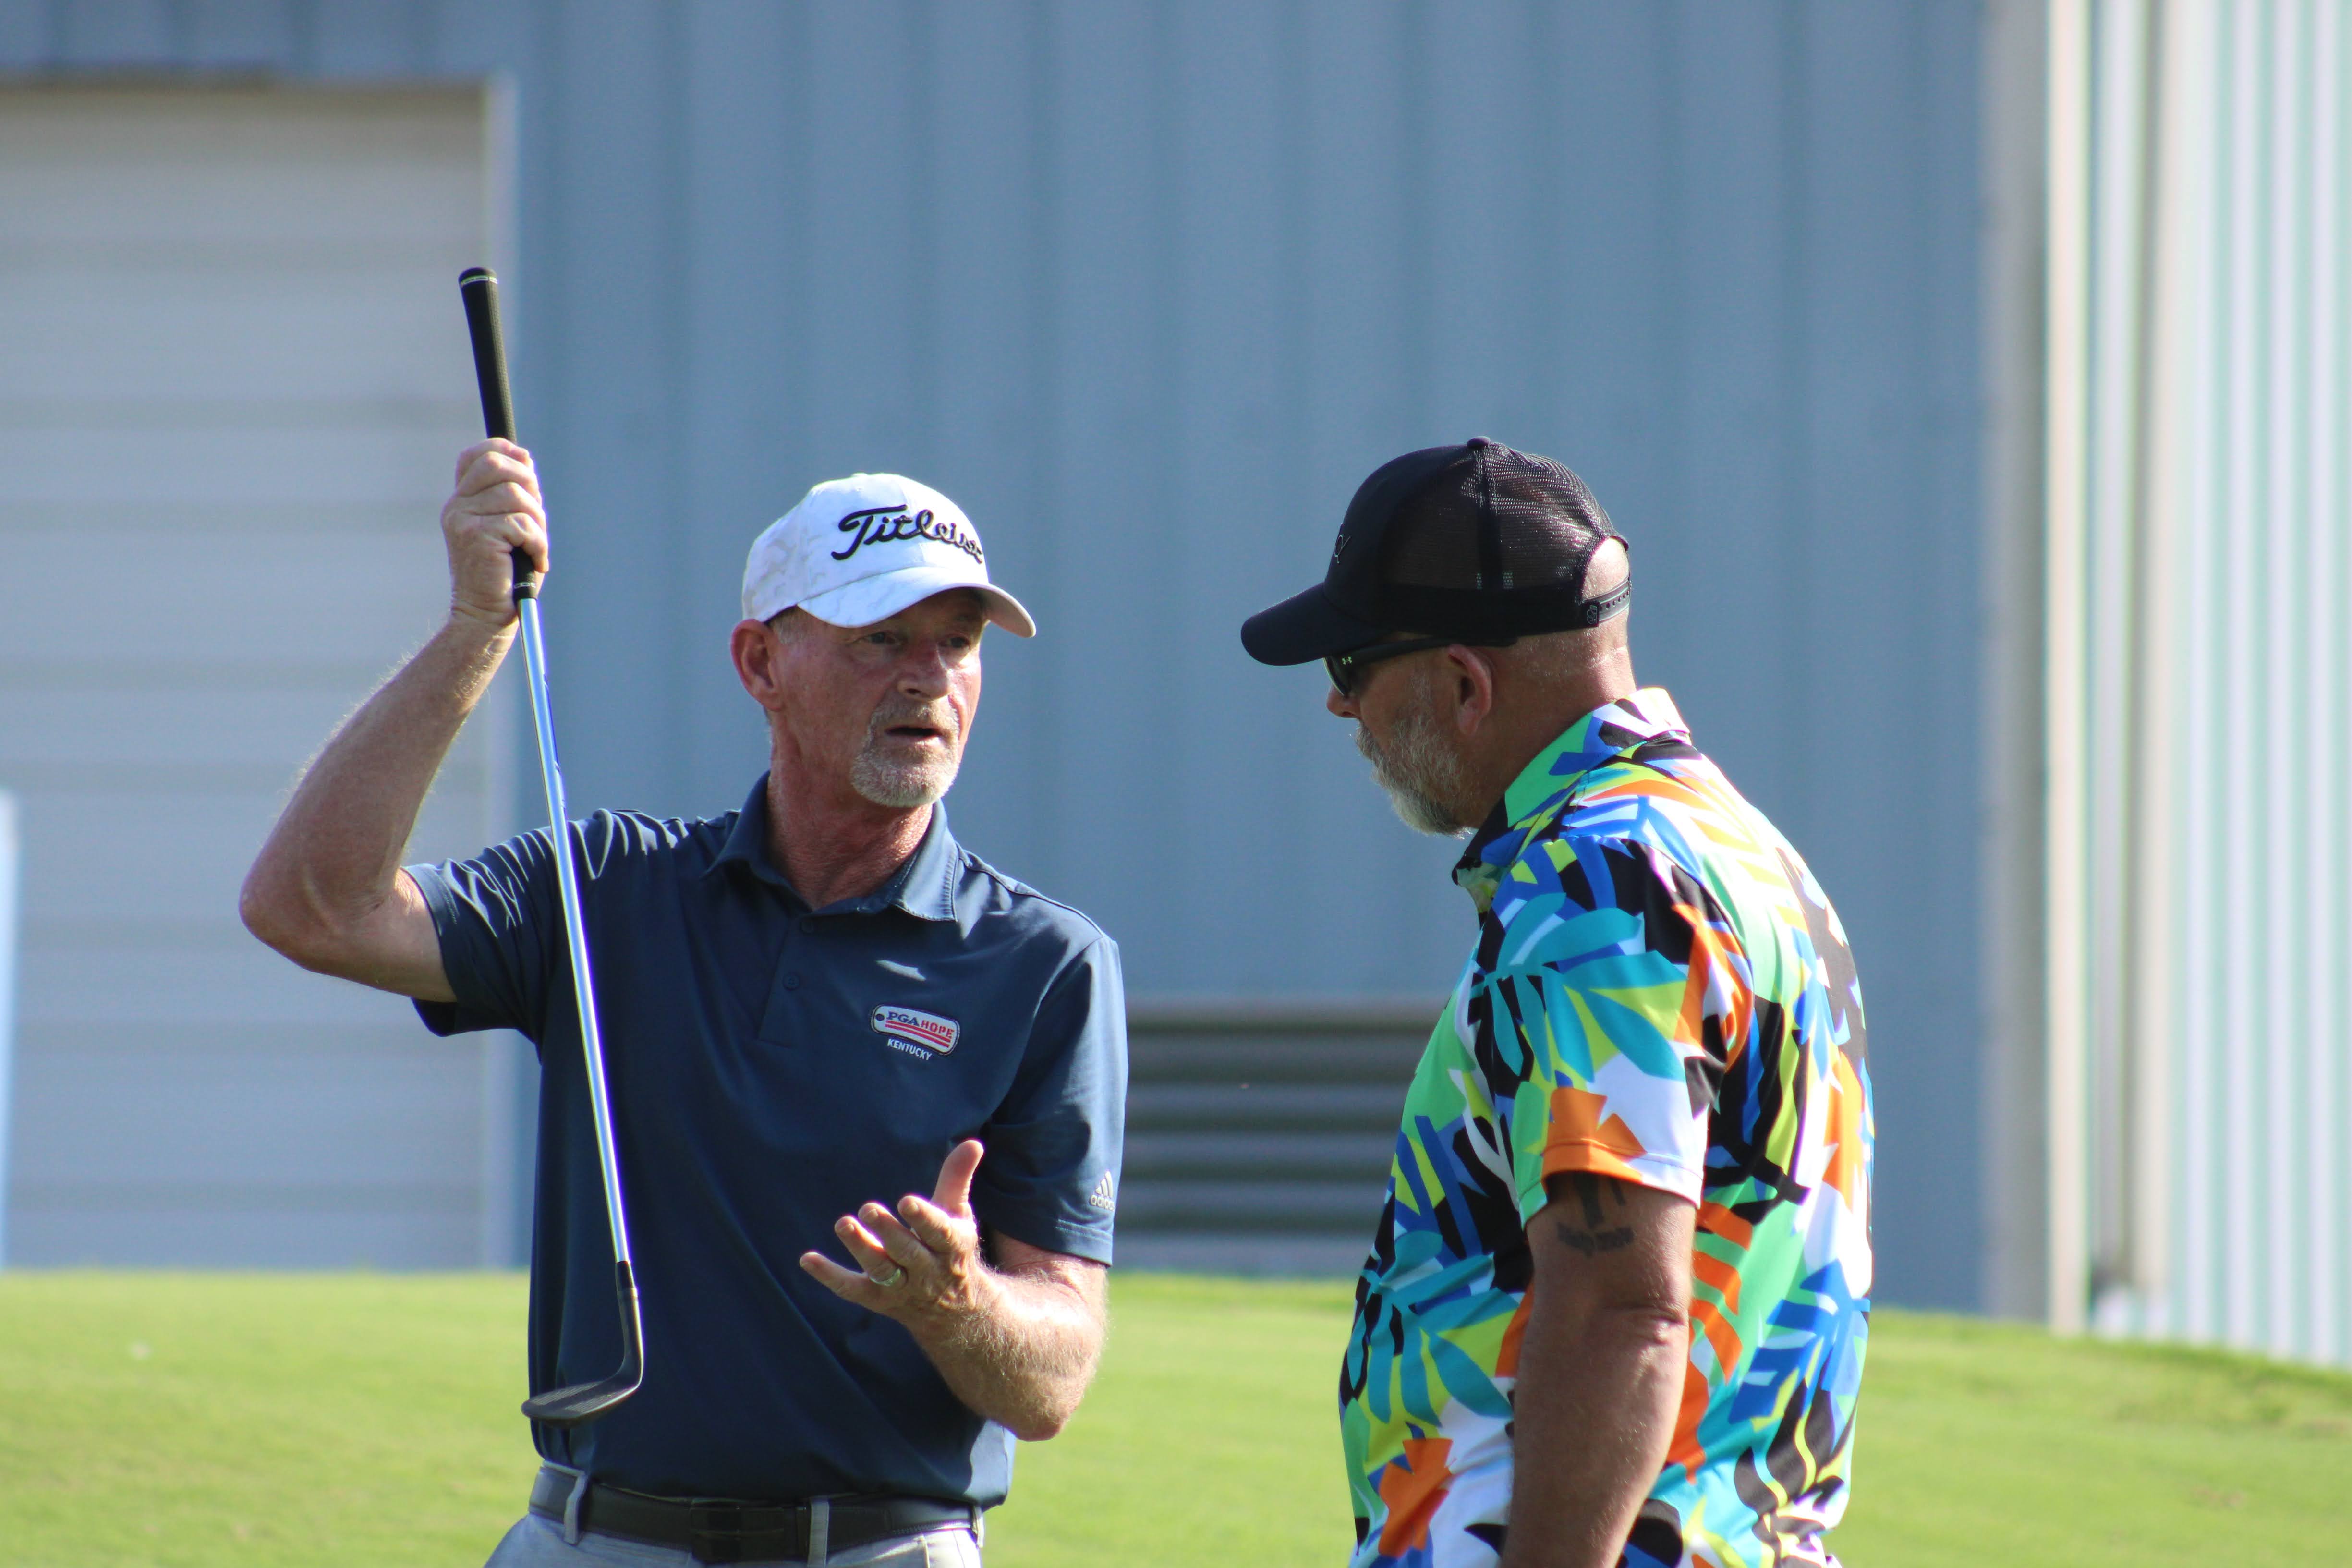 How Tim Reeves, PGA, is Supporting Fellow Veterans Through PGA HOPE